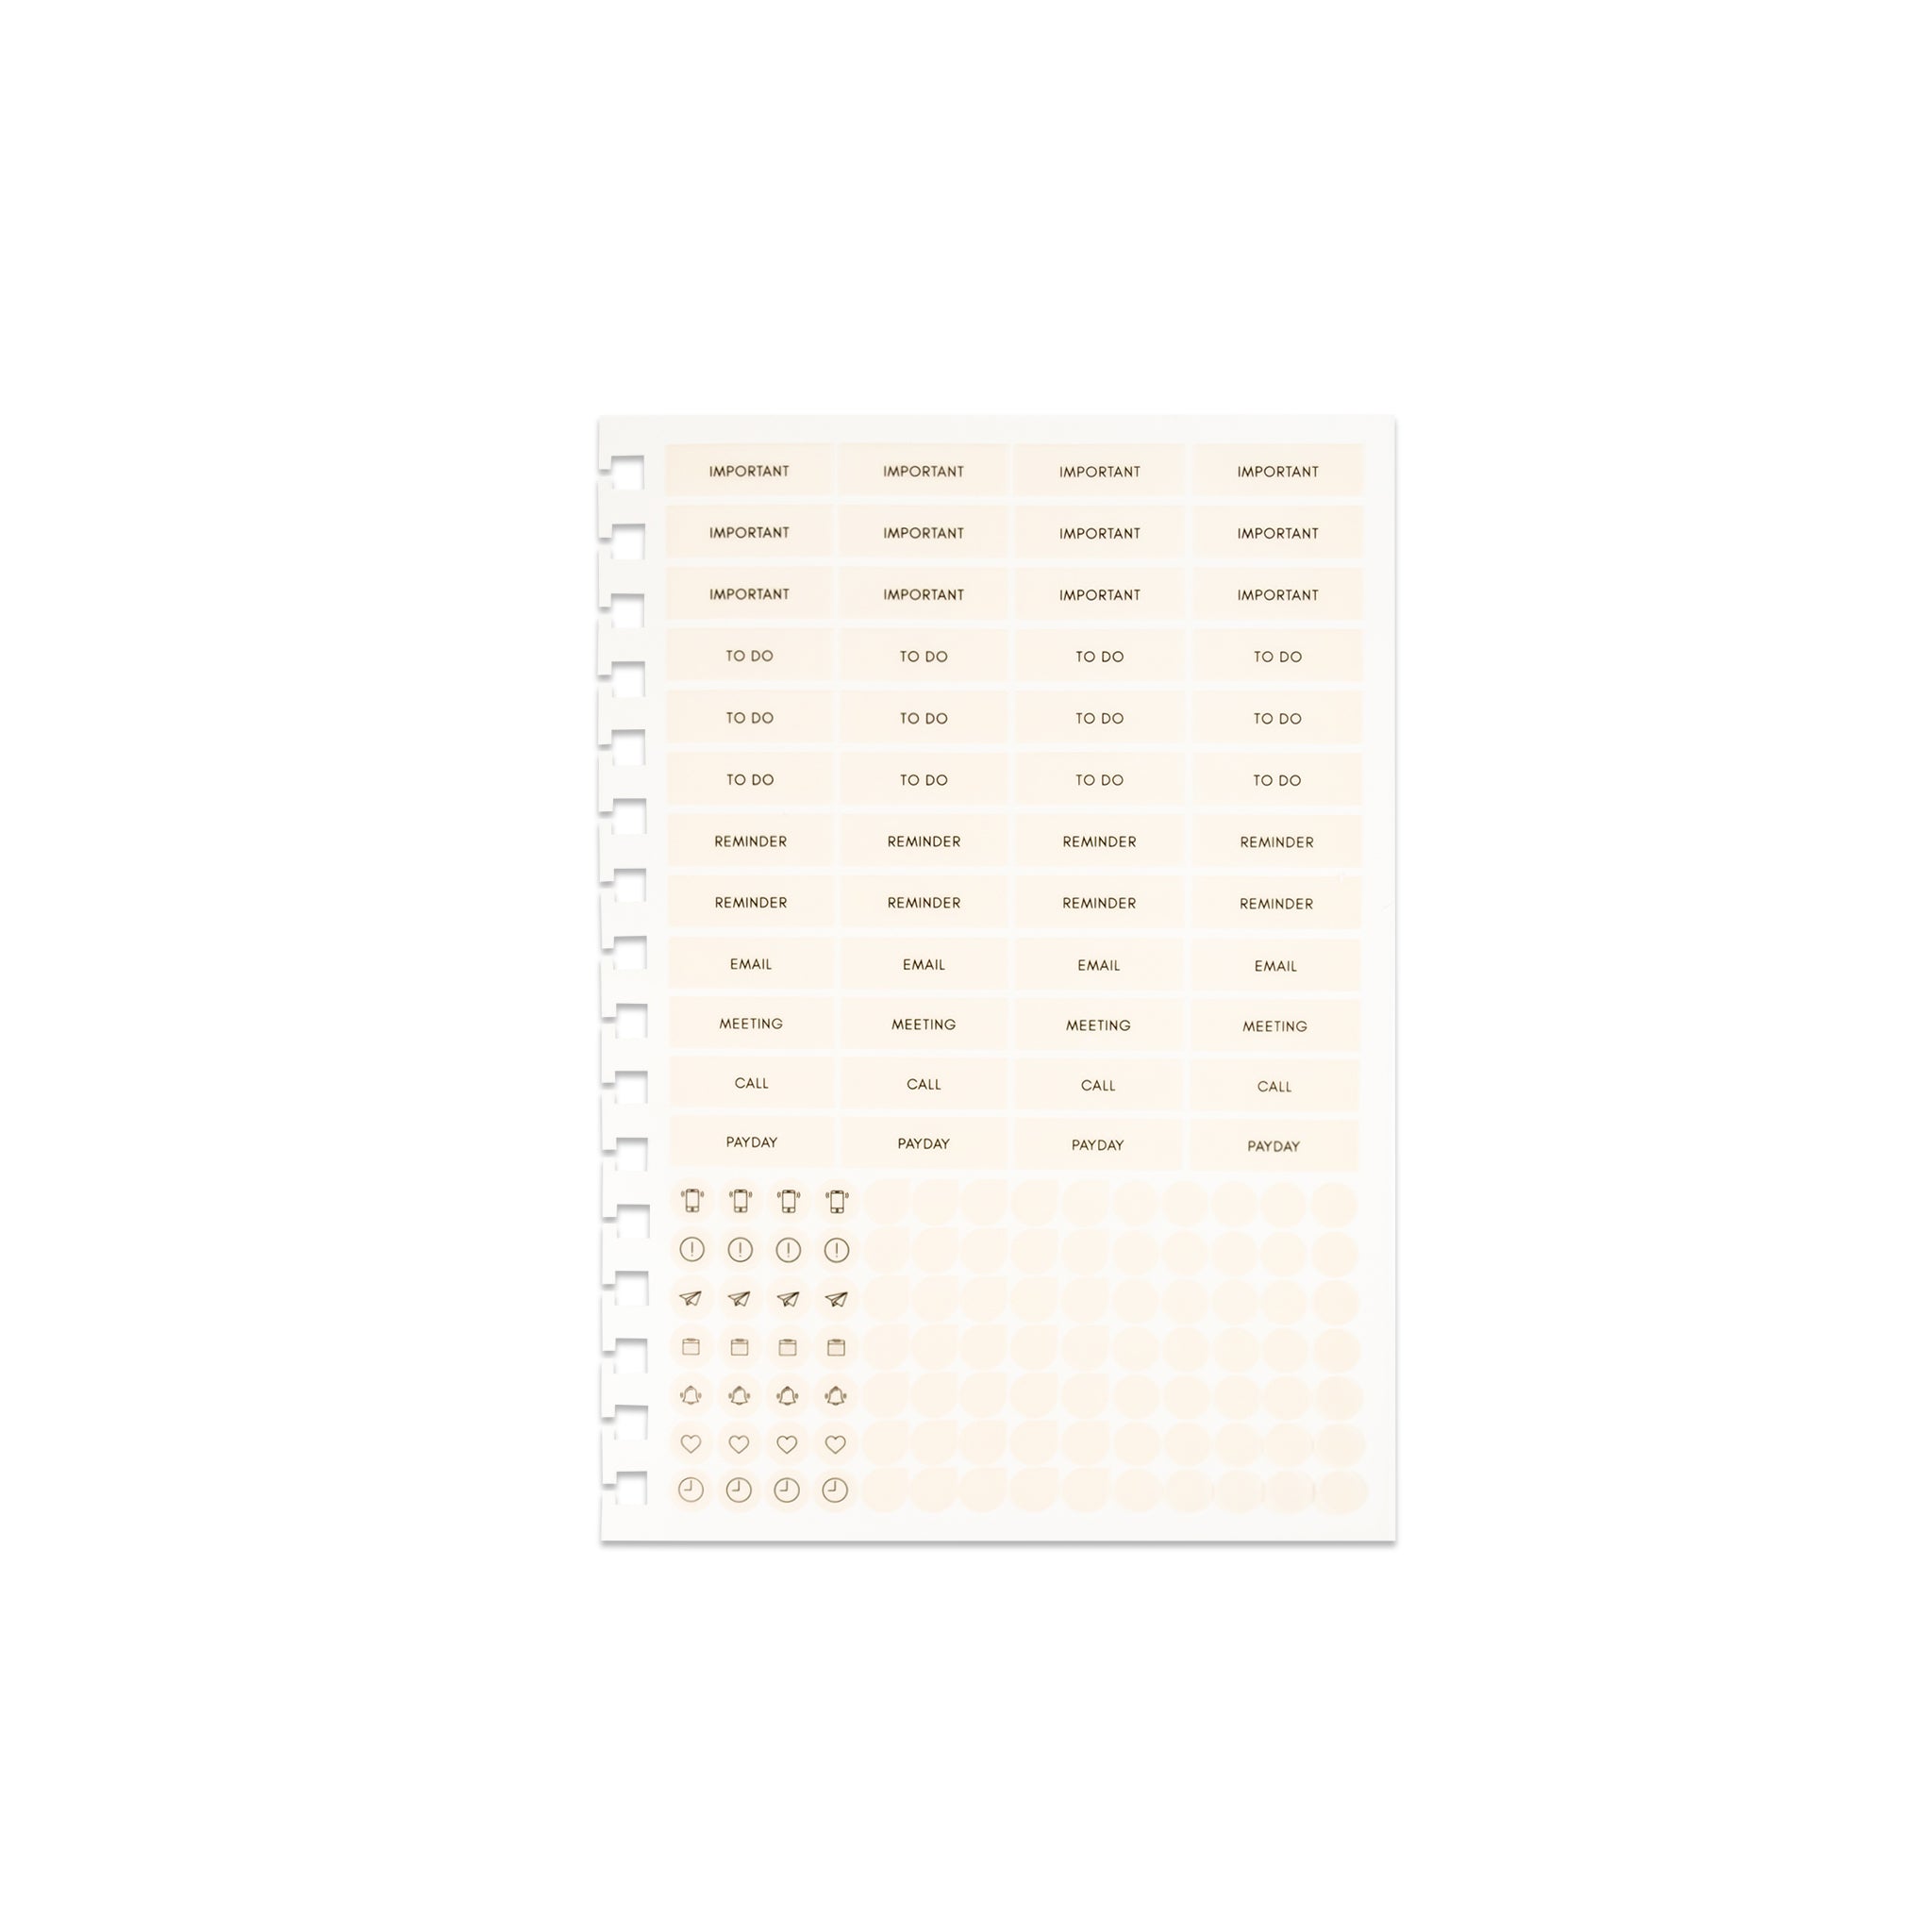 DON'T FORGET Stickers for Planner / Reminder Stickers / to Do Planner  Stickers / Due Today Stickers / Deadline Planner Stickers 